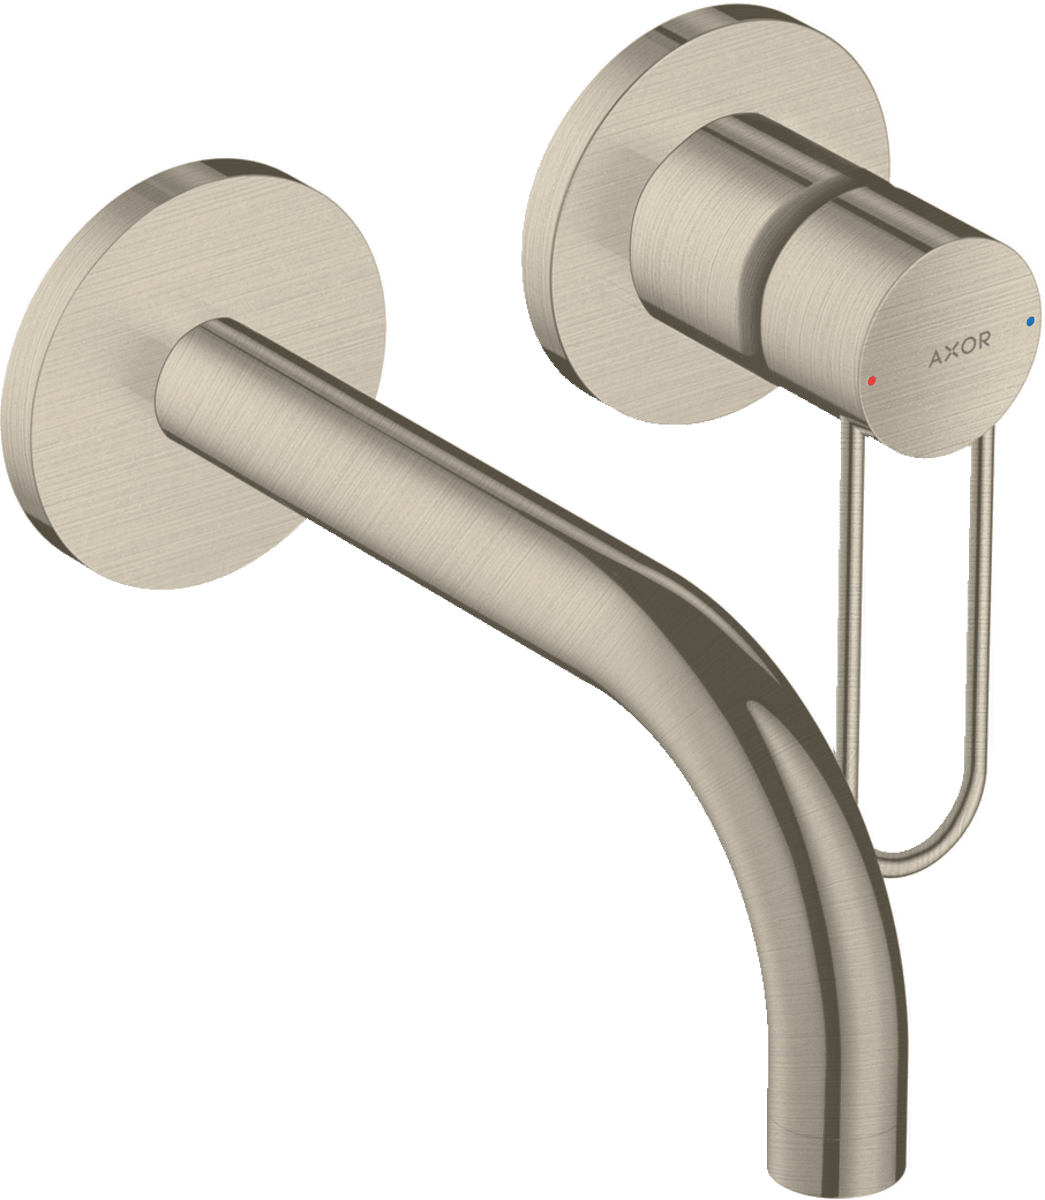 Picture of HANSGROHE AXOR Uno Single lever basin mixer for concealed installation wall-mounted with loop handle and spout 165 mm #38121820 - Brushed Nickel